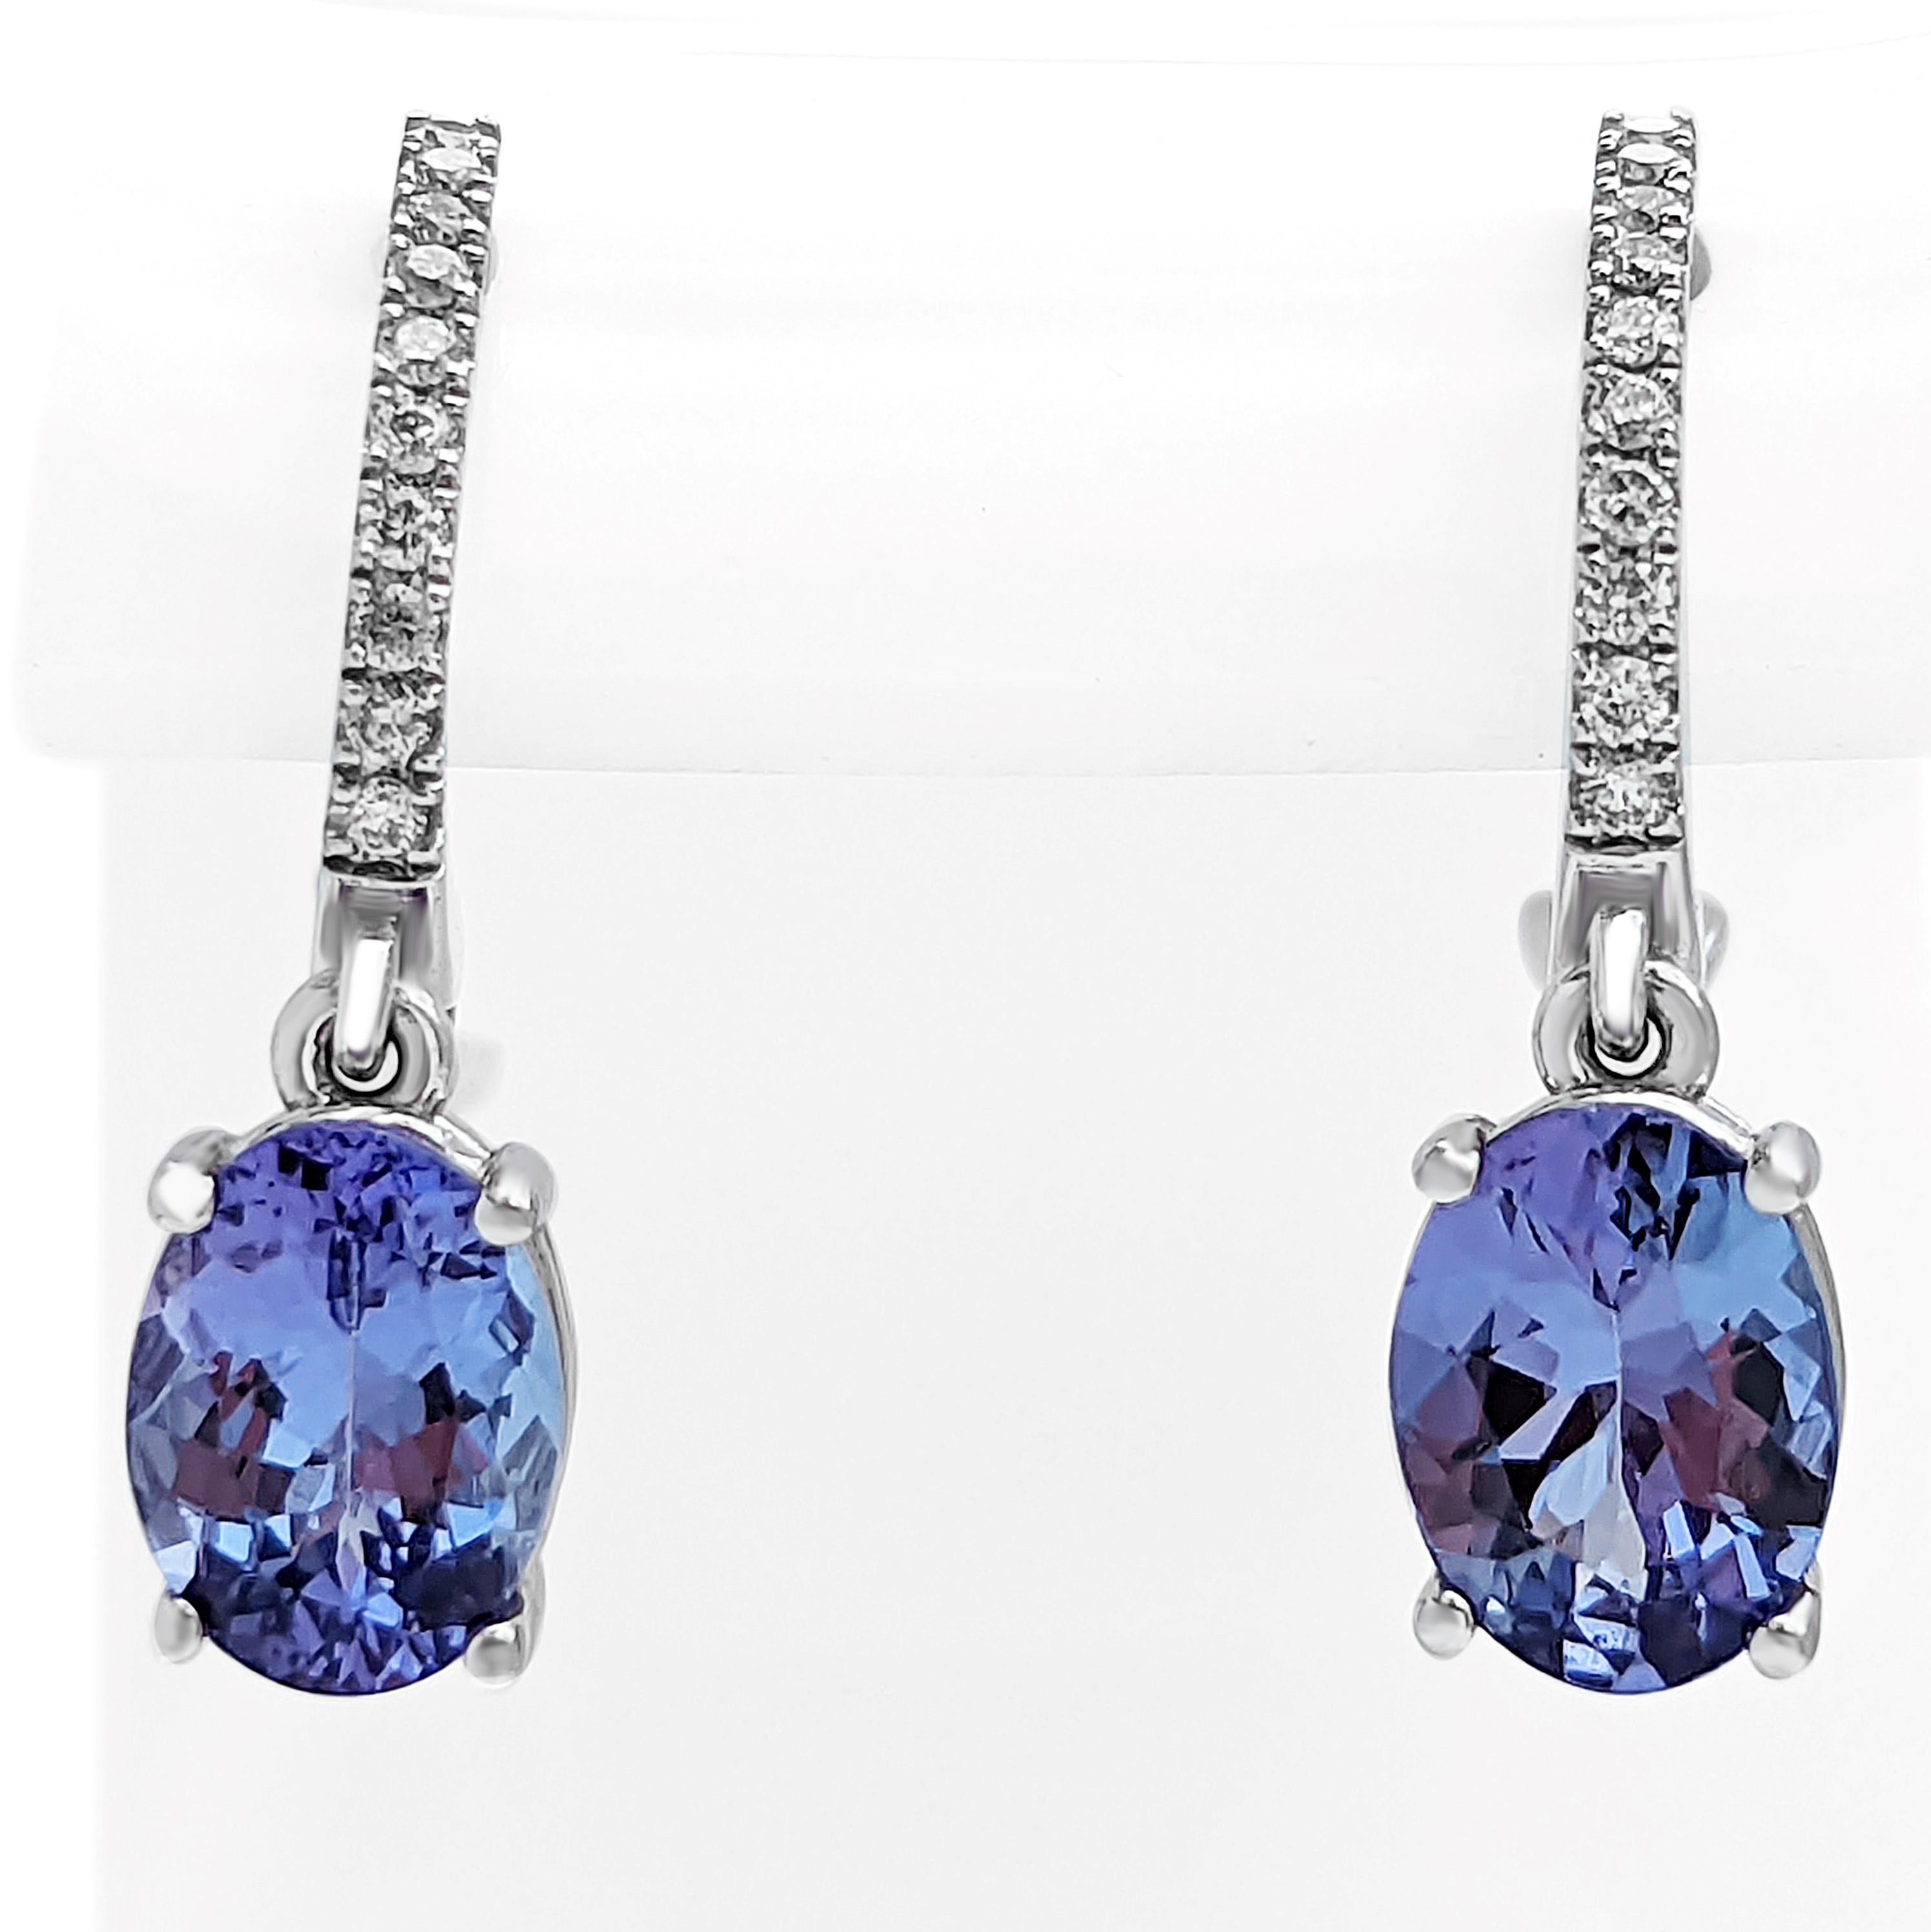 Oval Cut 2.44 Carat Tanzanite and 0.16 Ct Diamonds, 14 Kt. White Gold, Earrings